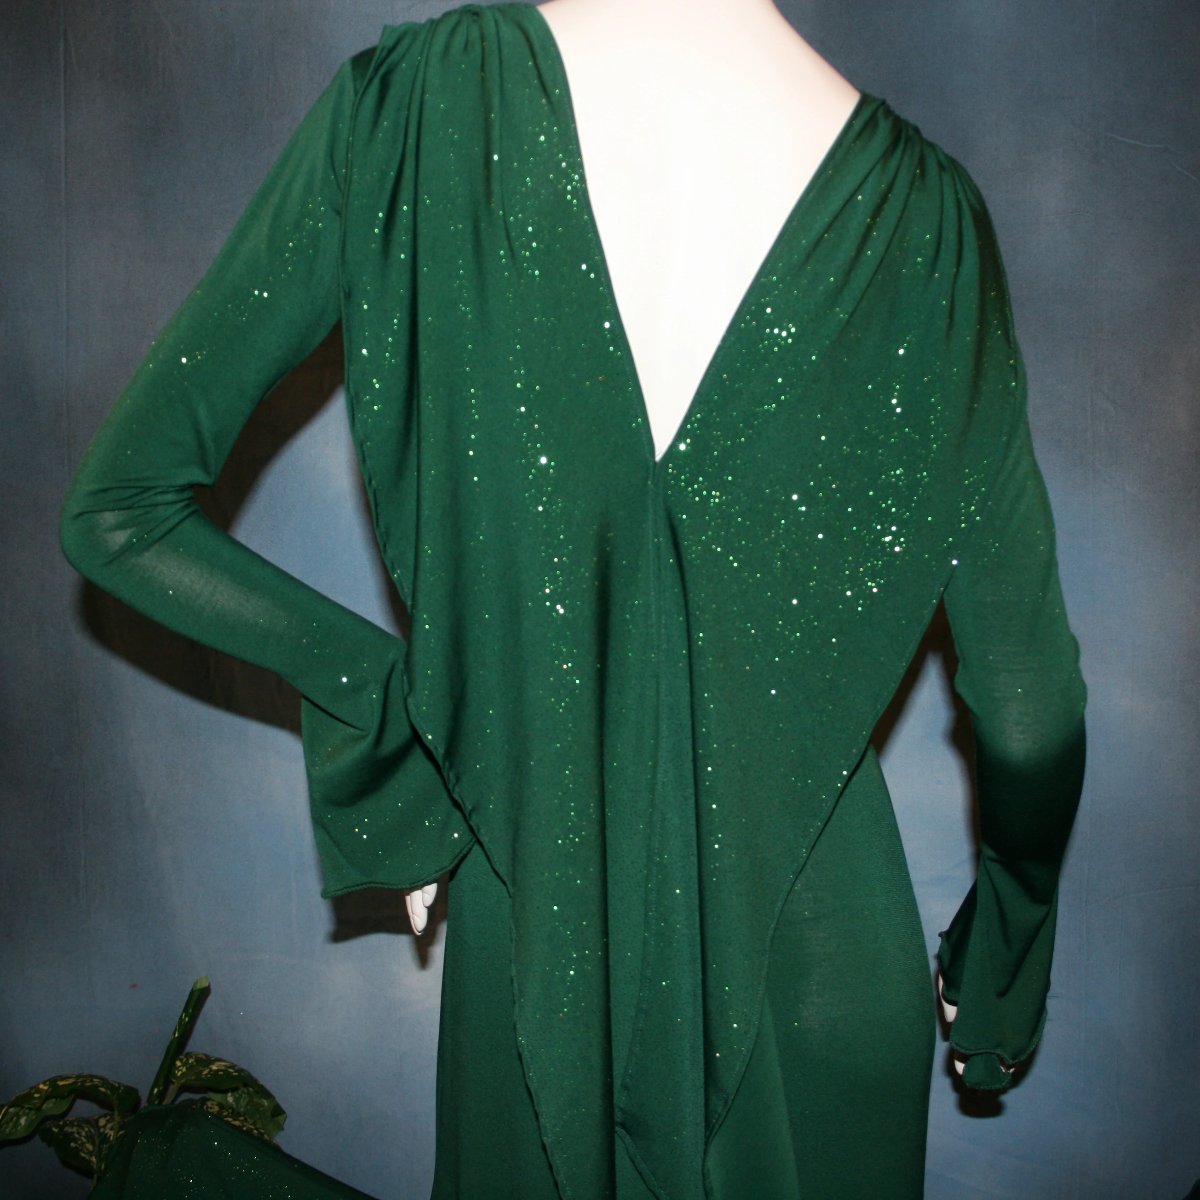 Crystal's Creations upper back view of Green social ballroom dress was created in luxurious deep emerald glitter slinky, with full  & flaring skirt bottom, long flair sleeves & draping trailing down the back makes this gorgeous dress very elegant & classy!